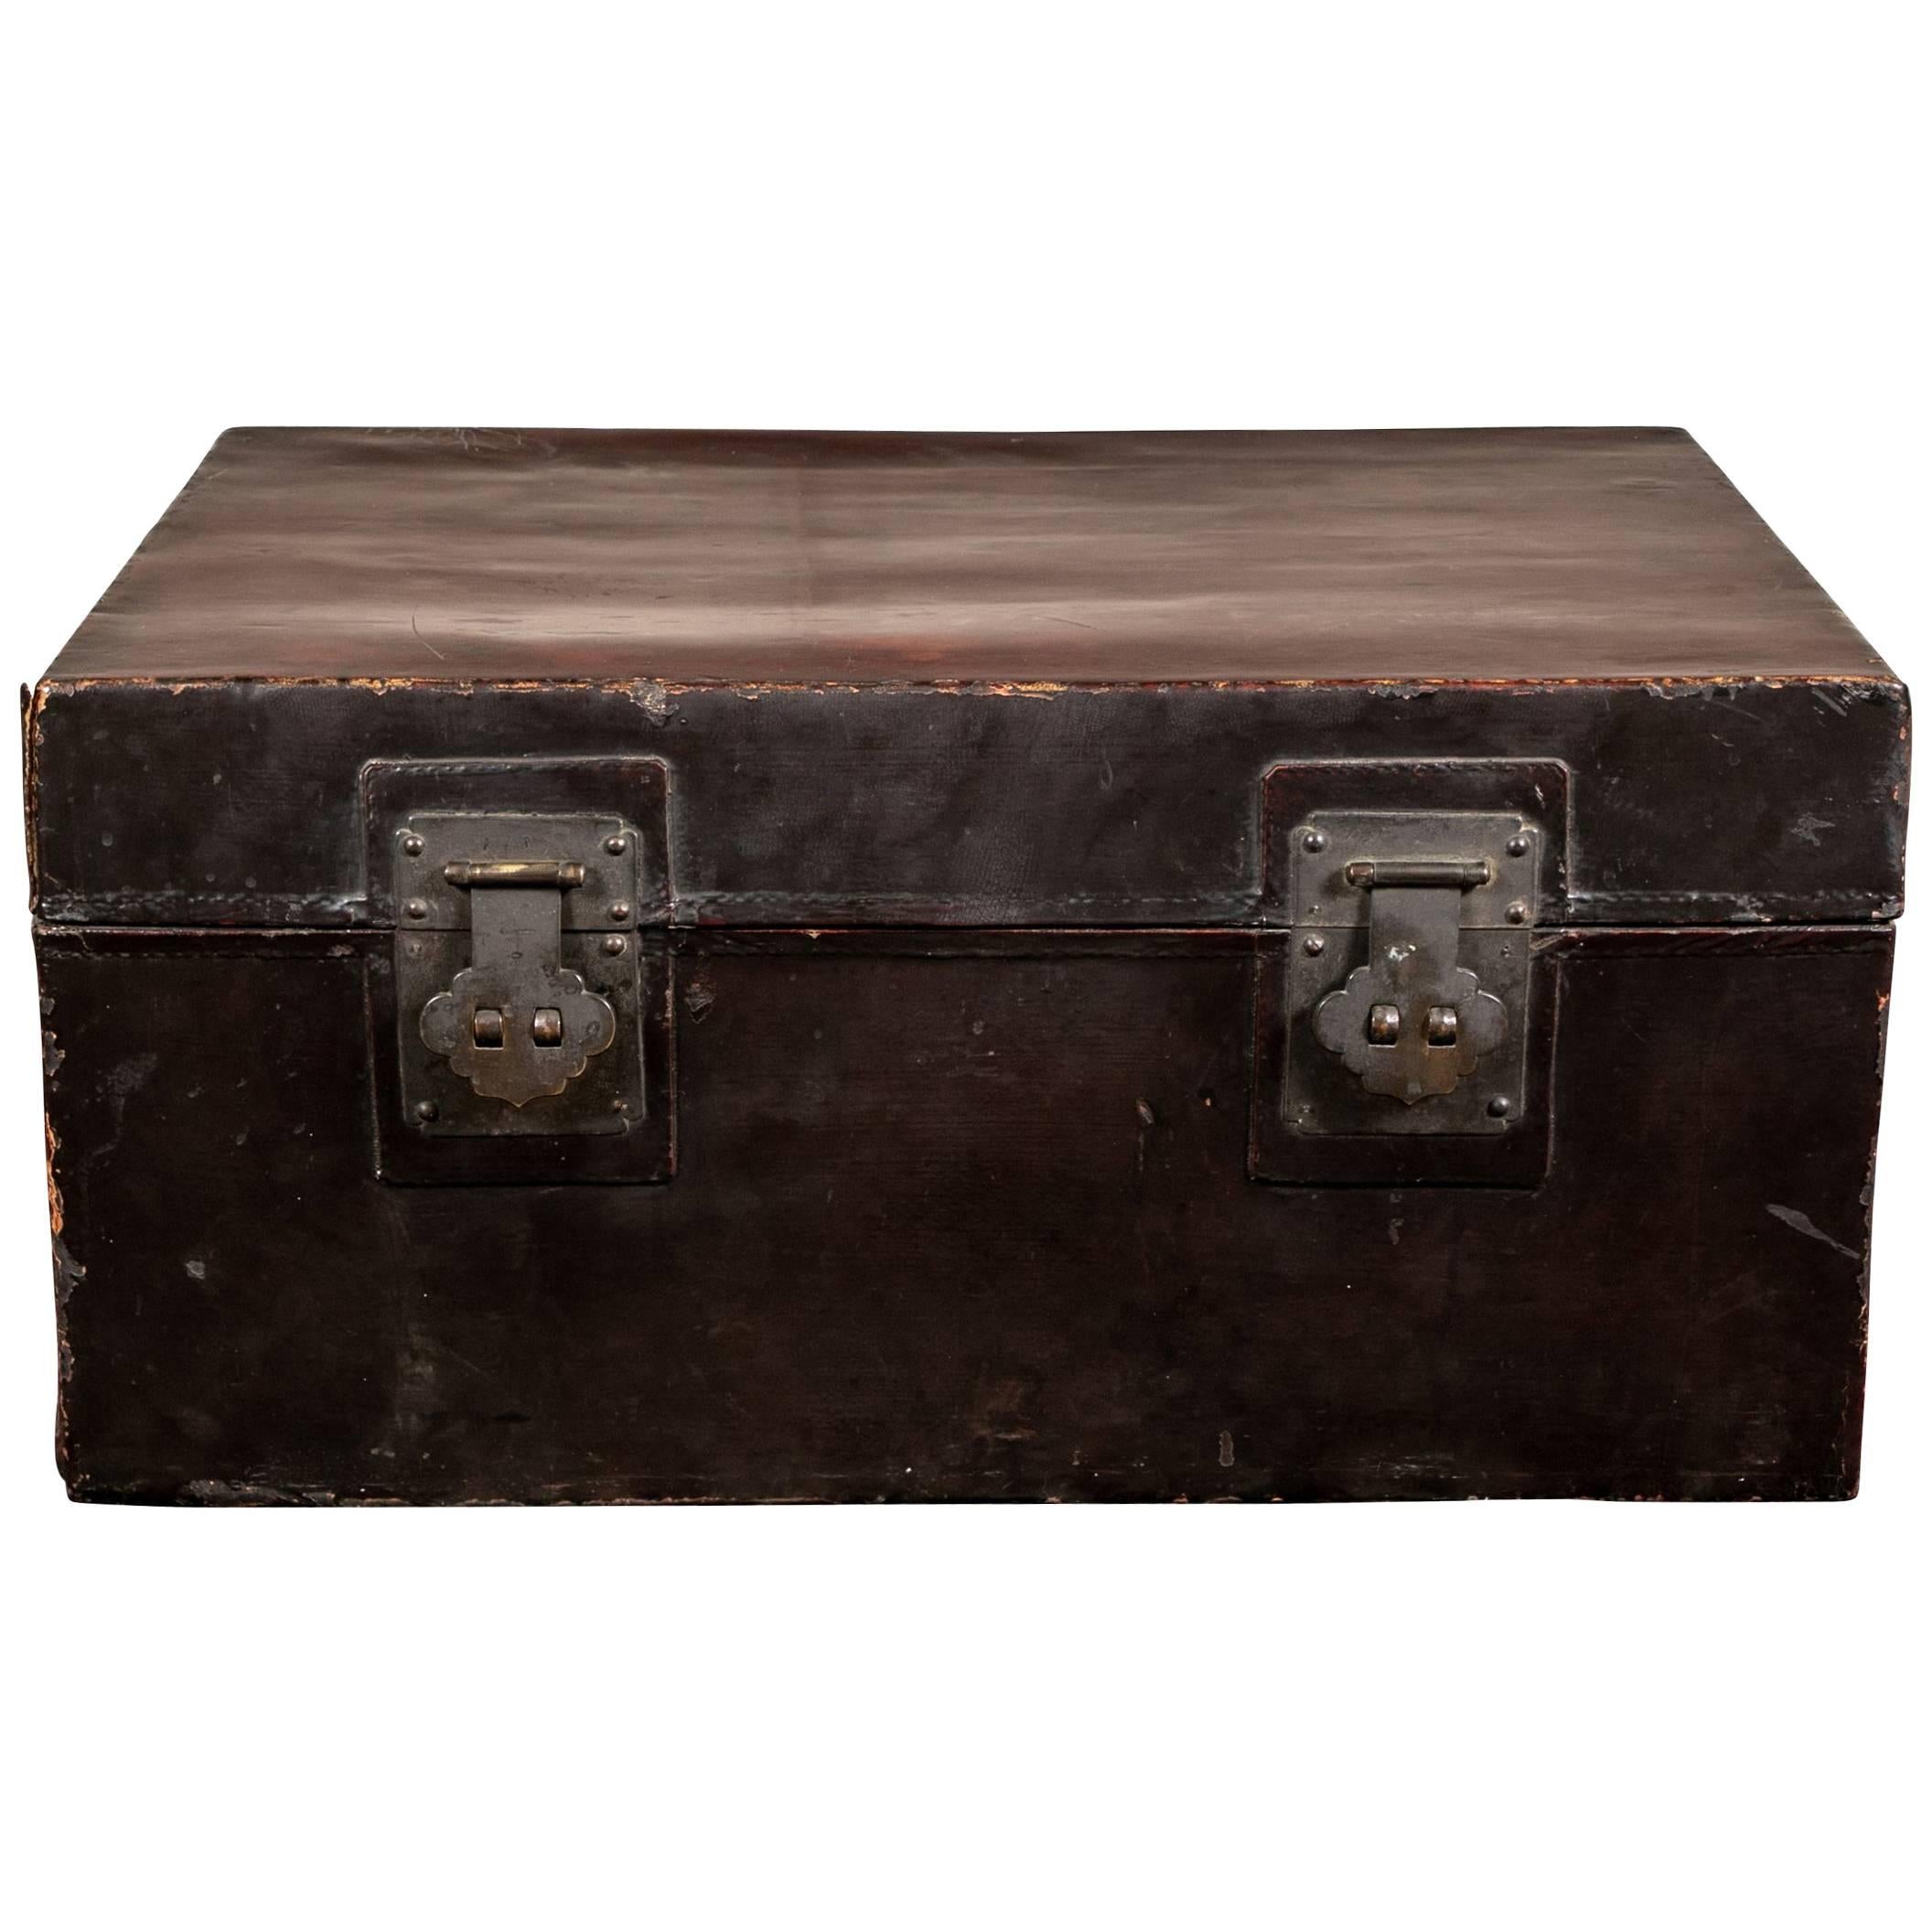 Antique Chinese Double-Lock Pig Skin Trunk as Coffee Table